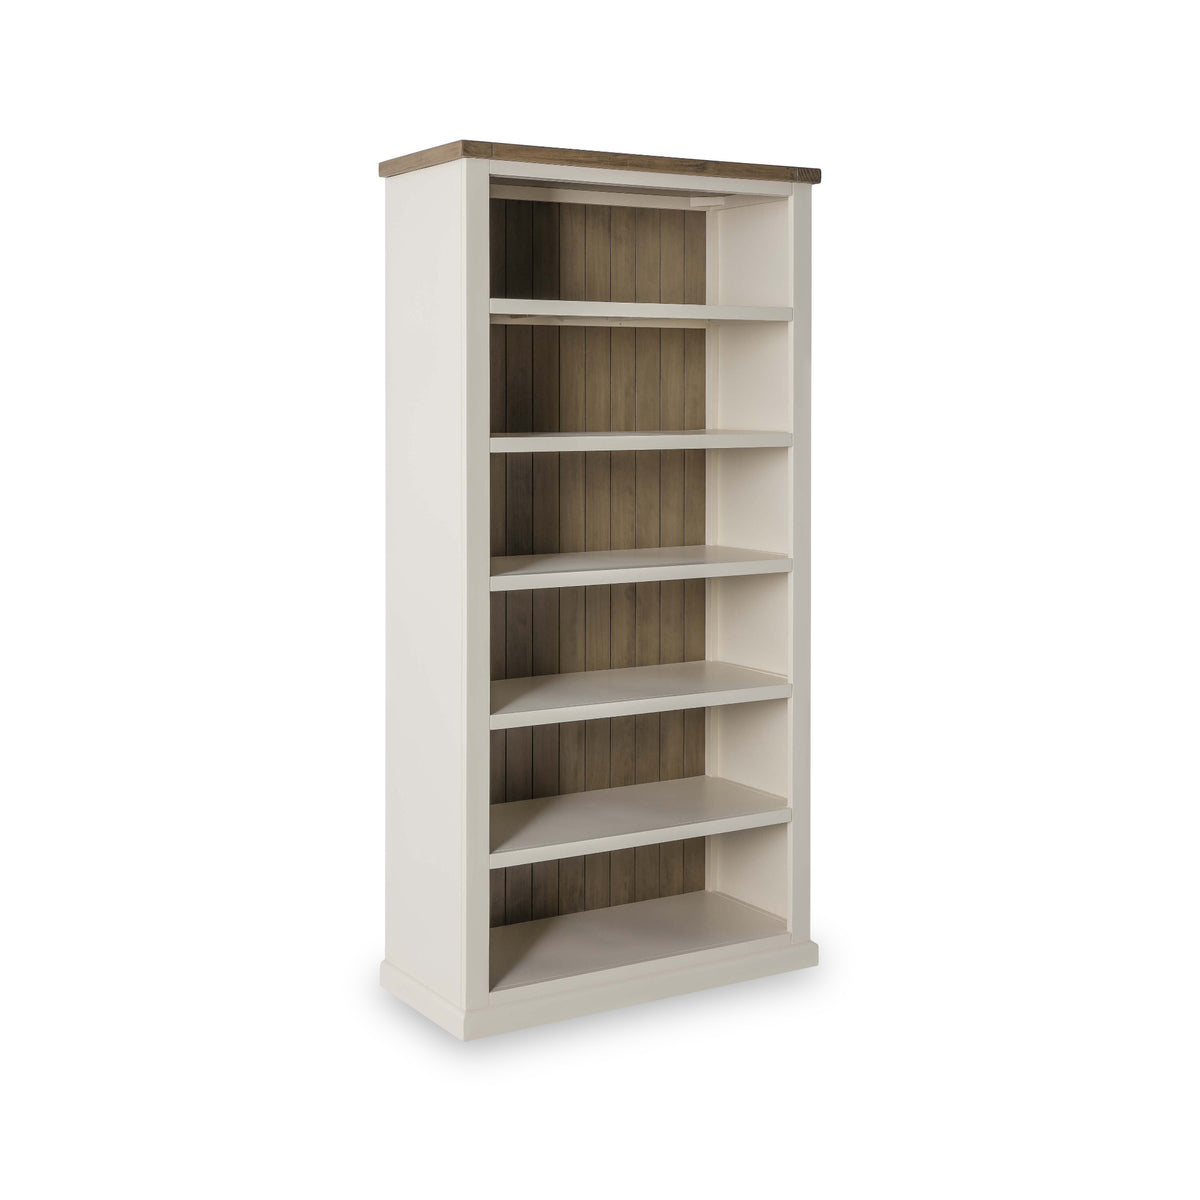 Hove Ivory Large Bookcase from Roseland Furniture